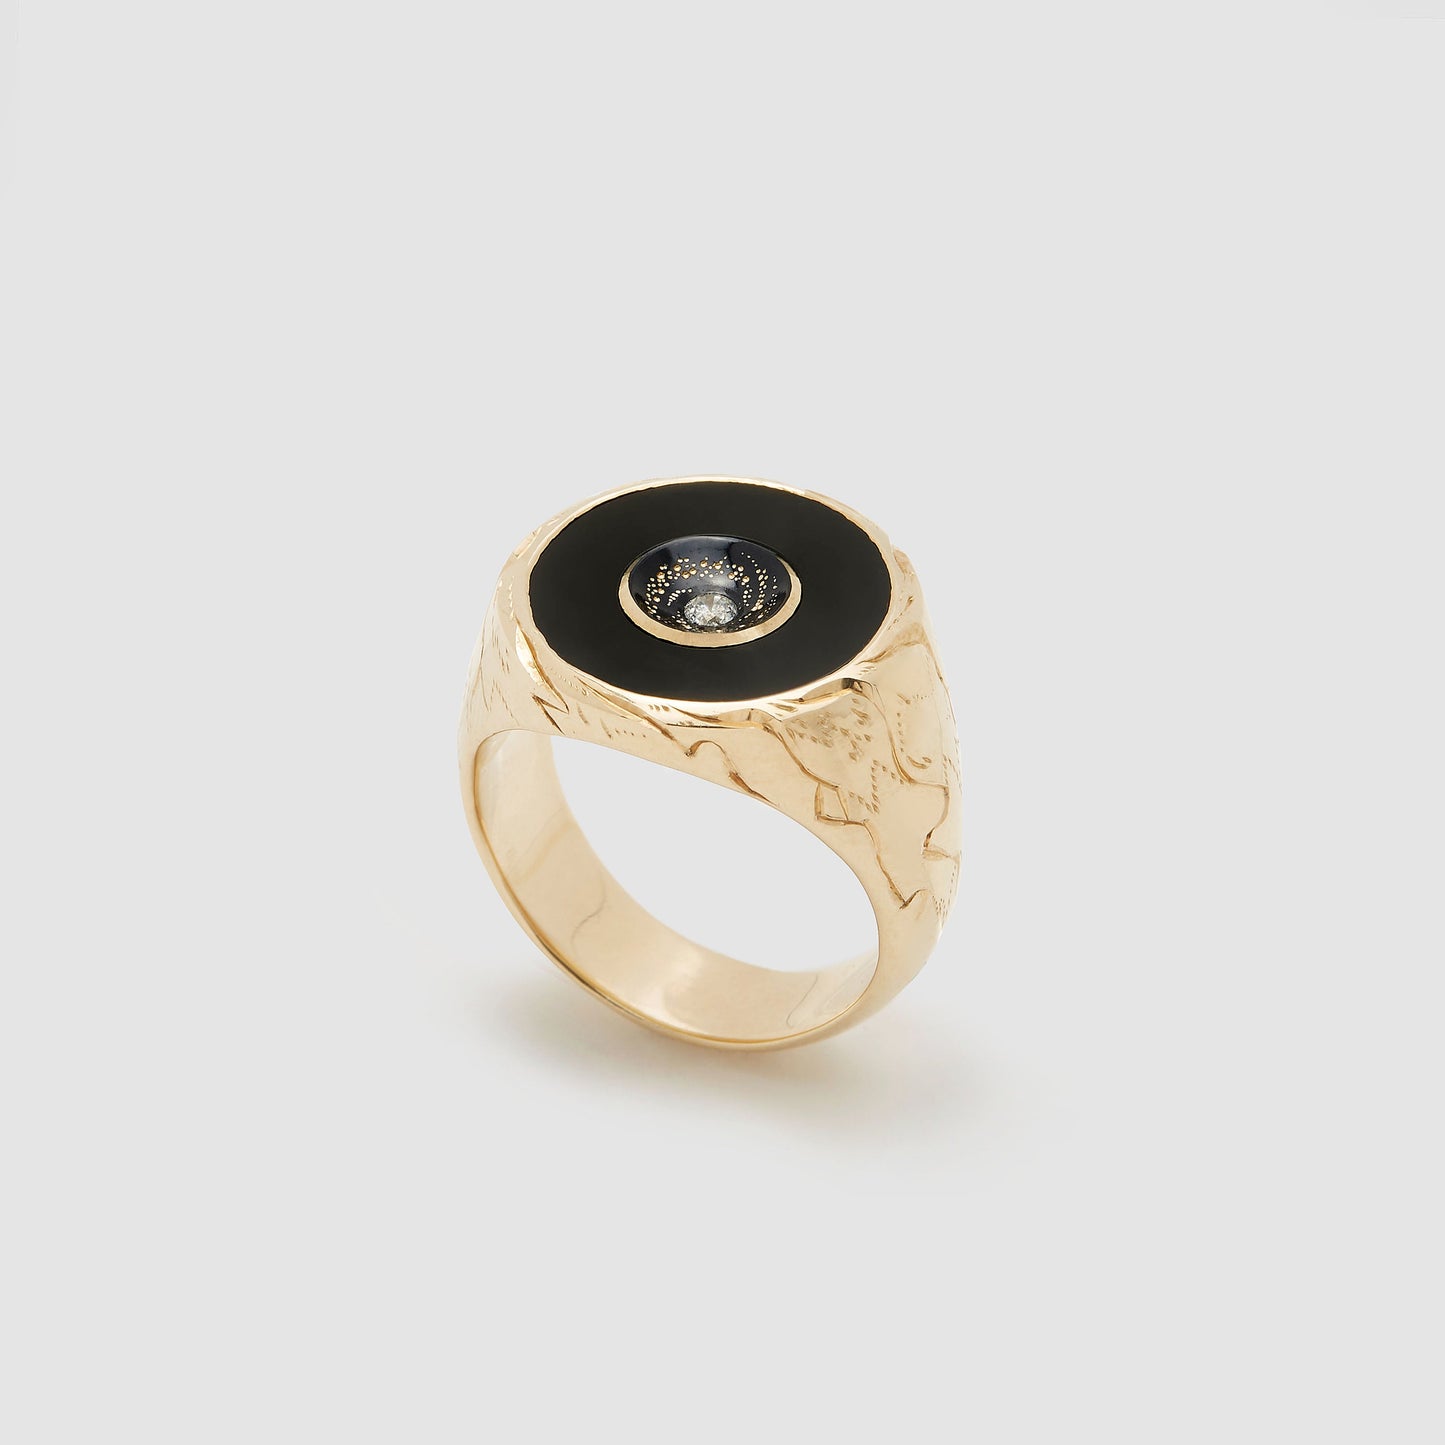 Castro Smith Jewelry Gold Oubliette Signet Ring with Onyx Around a Concave Galaxy with a Centre Diamond in Right Side View.